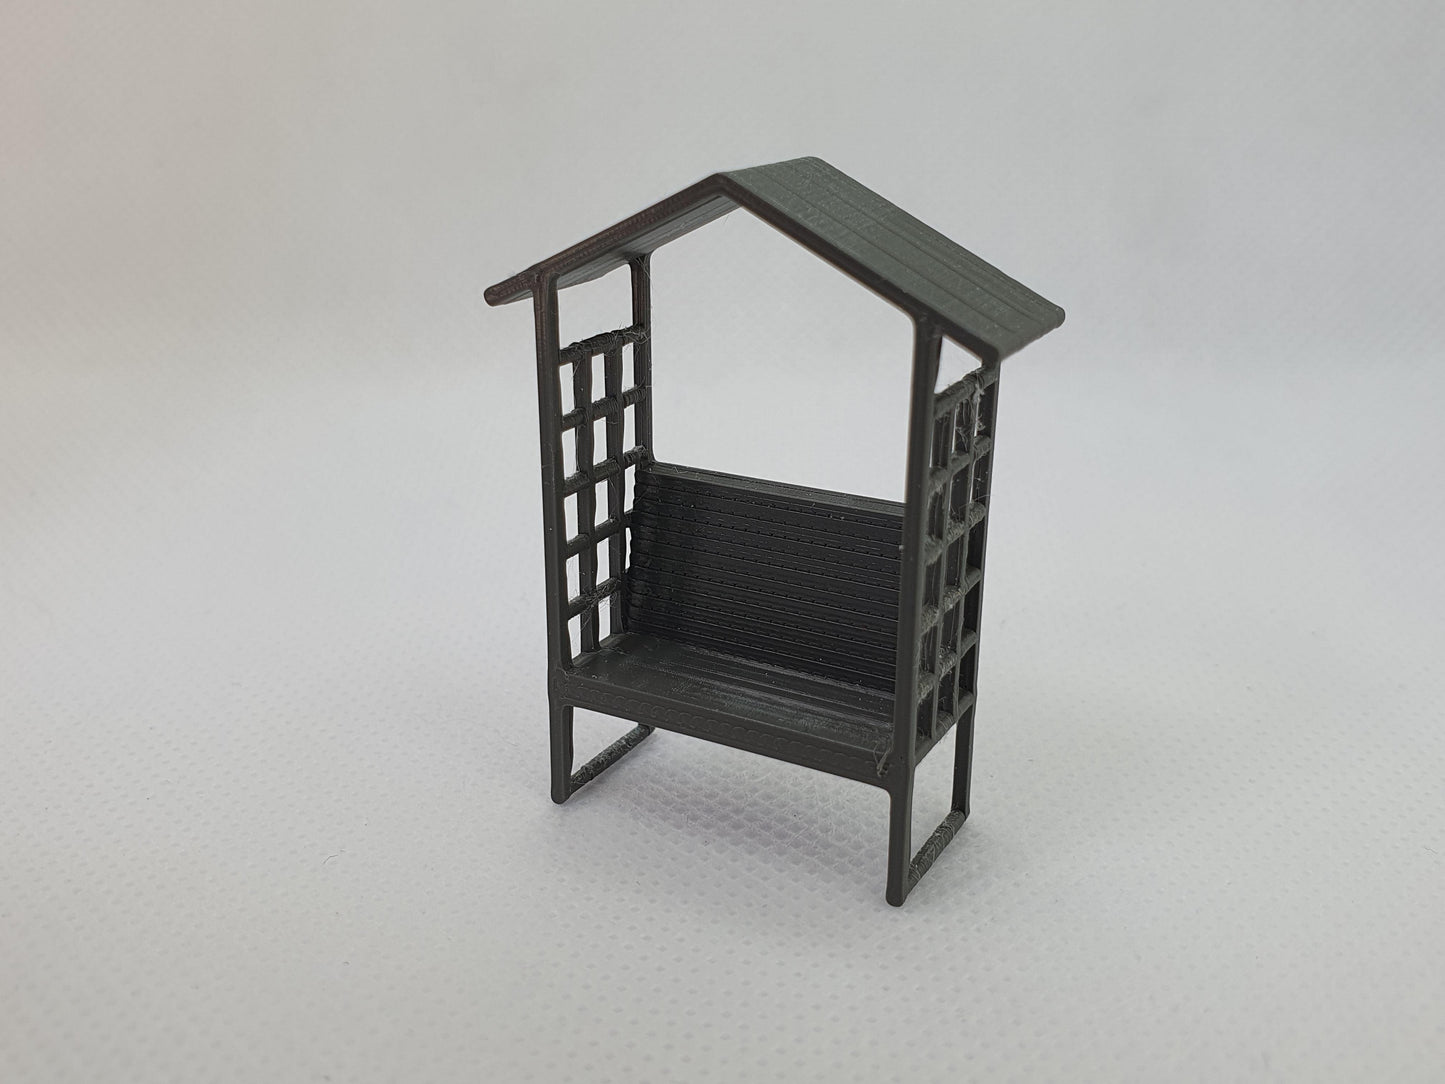 O gauge scale model of a garden seat with trellis - Three Peaks Models